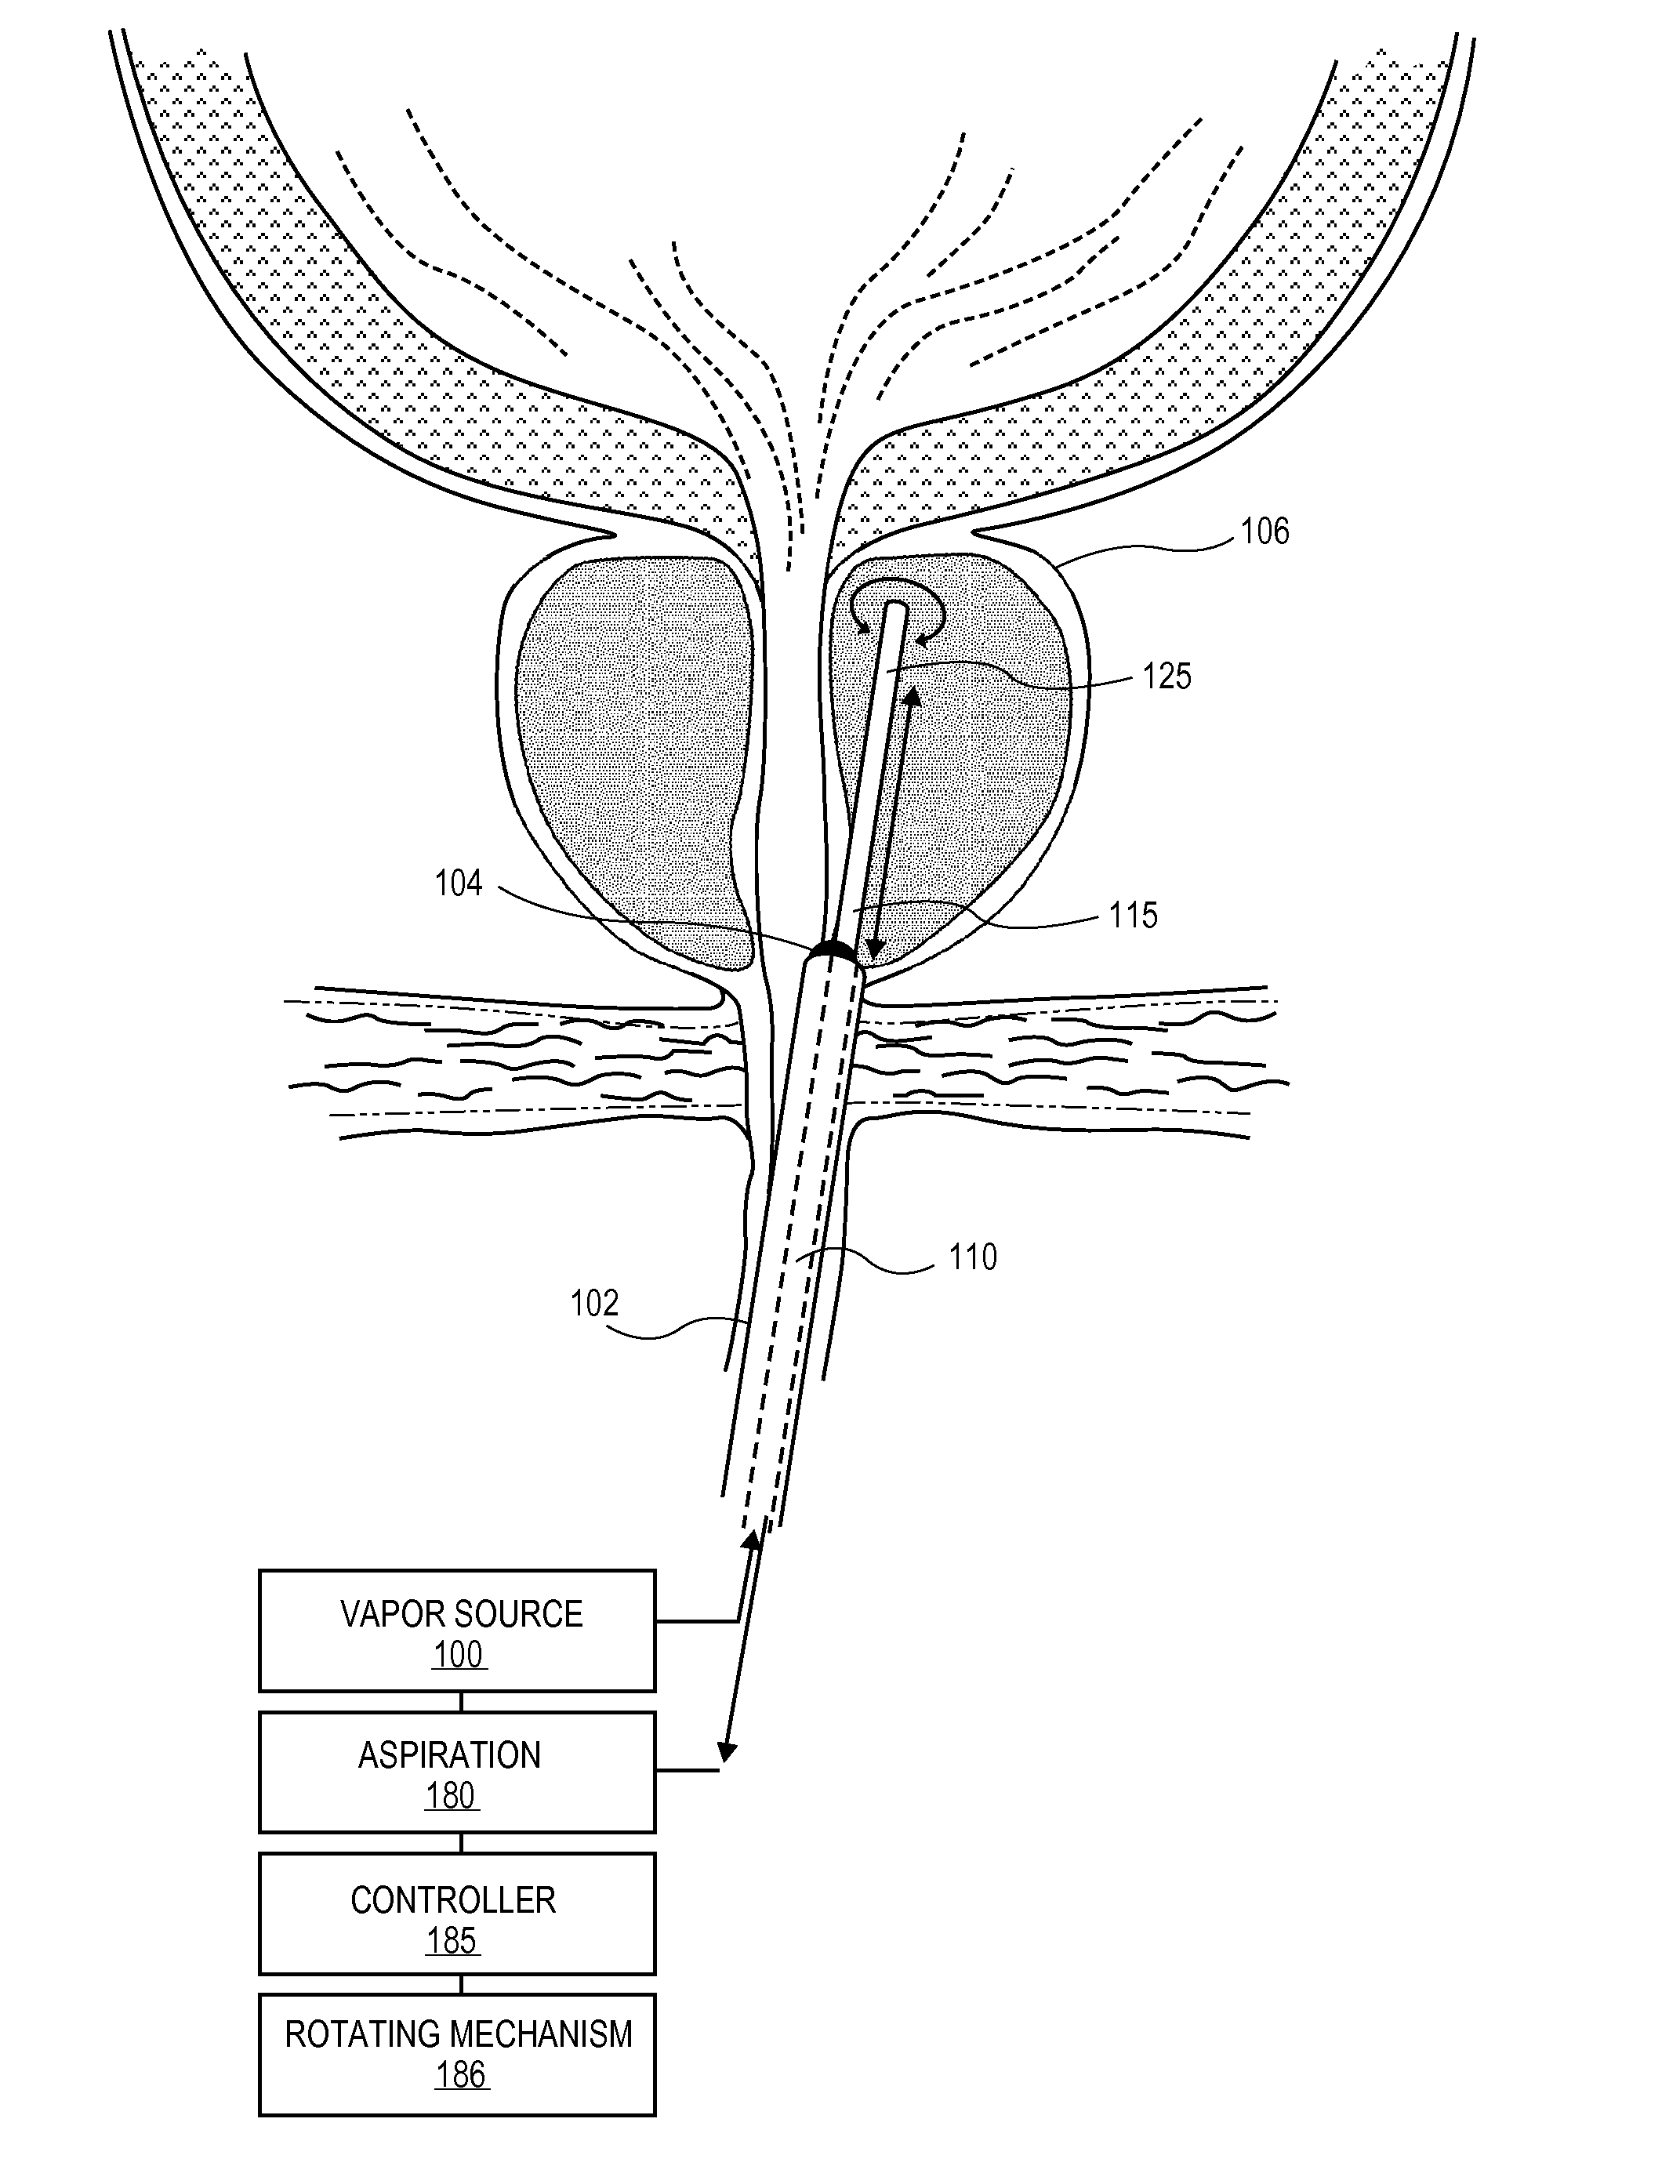 Systems and Methods for Treatment of Prostatic Tissue